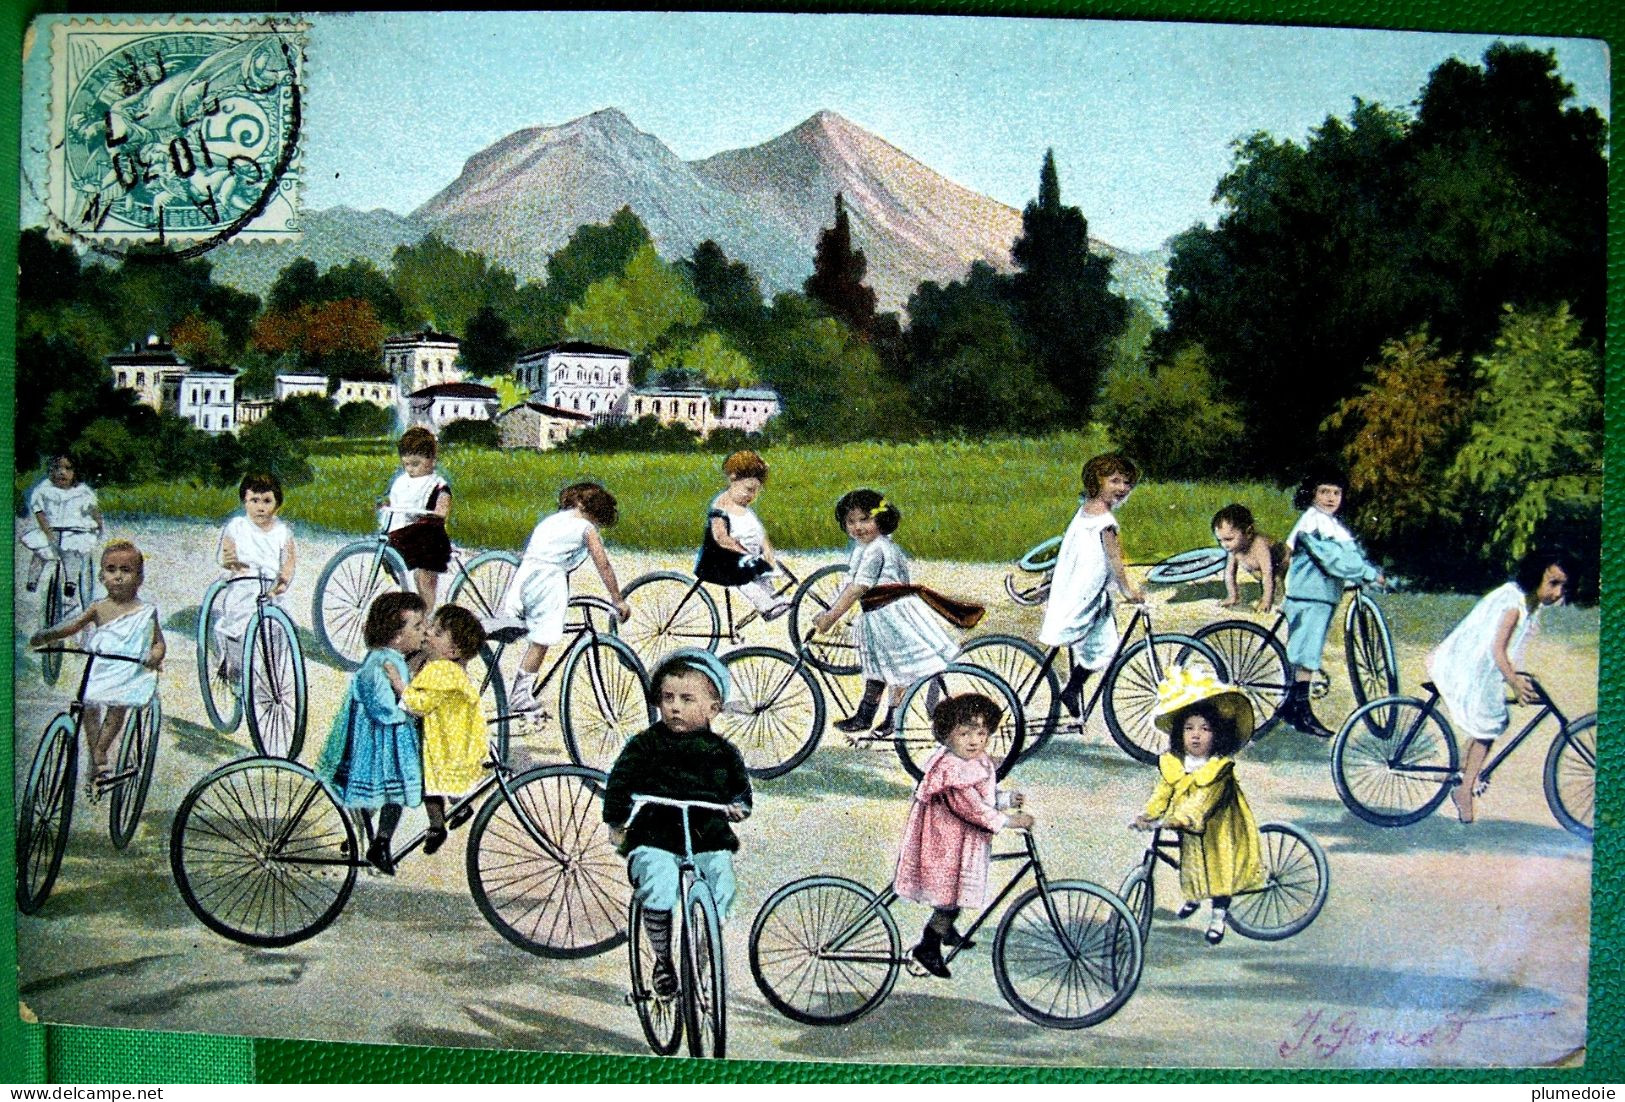 CPA  Enfants BEBES MULTIPLES CYCLISTES PROMENADE EN VELO . 1908 . MULTI BABIES RIDING BICYCLE   BABY ON BIKE .  OLD PC - Children And Family Groups